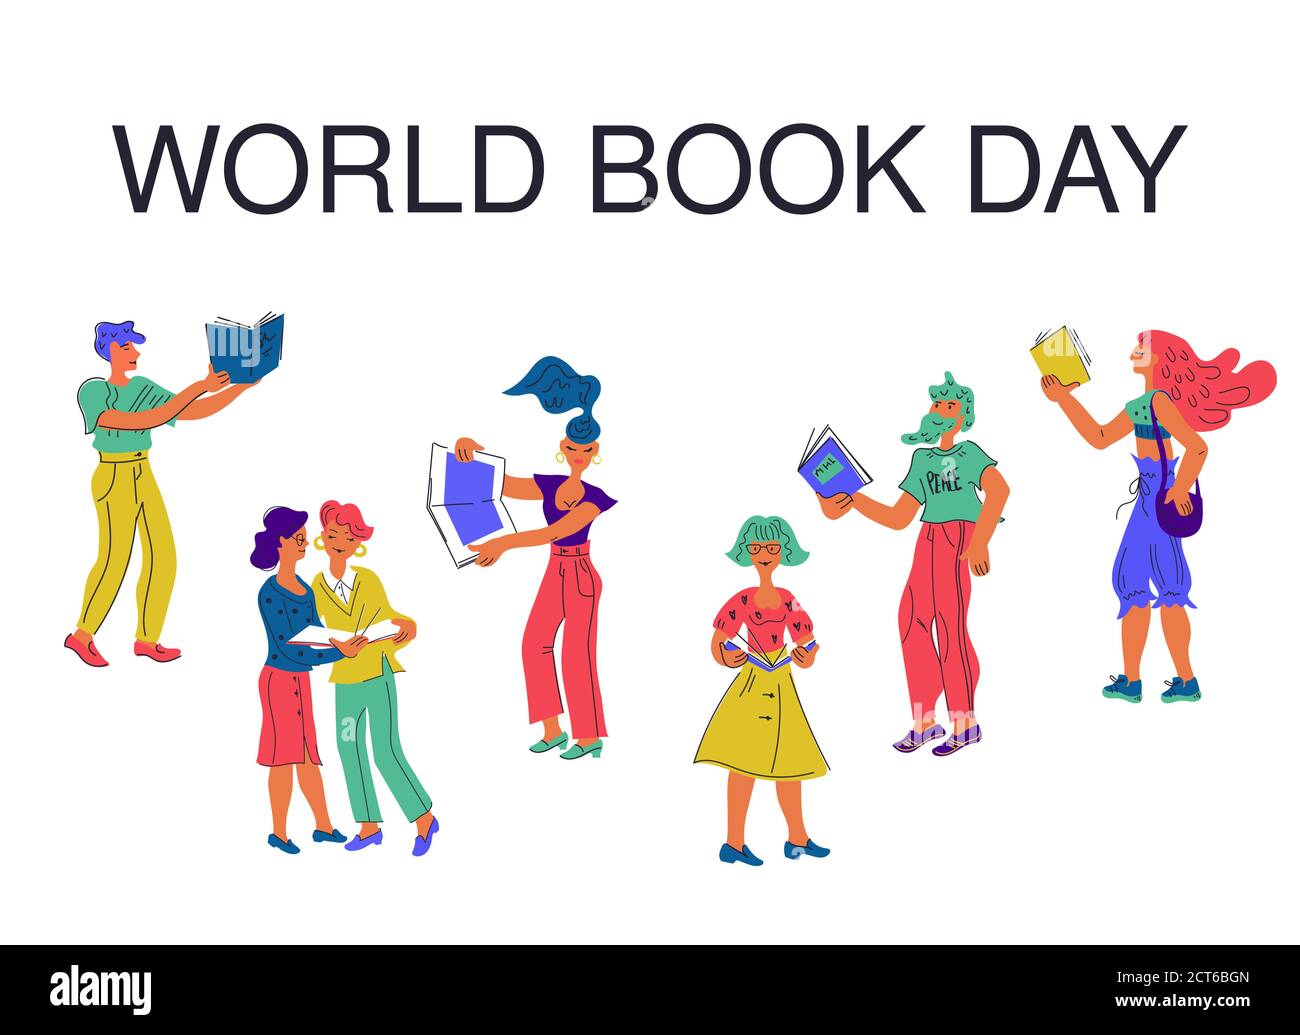 Banner for world book day with people reading books vector illustration